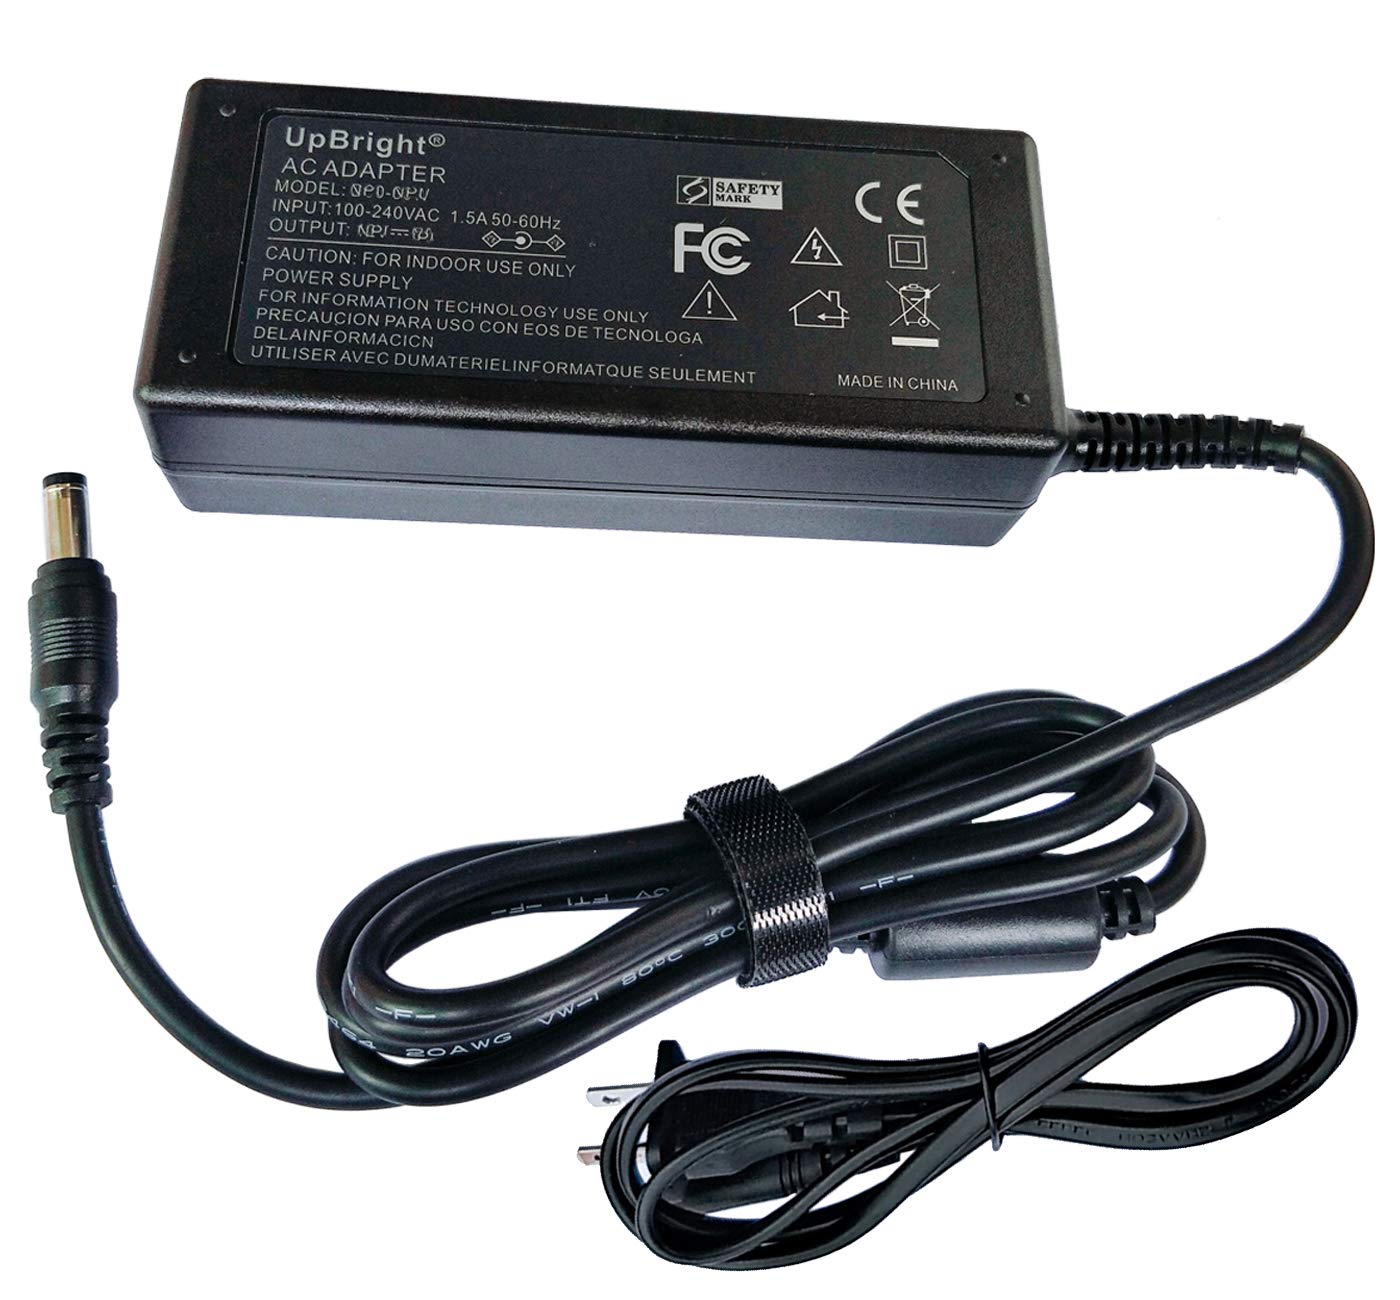 UpBright New AC DC Adapter Compatible with RCA RPJ133 RPJ133-B RPJ133-12DISP2 RPJ133B RPJ13312DISP2 720P Smart Roku WiFi HD Home Theater Projector Power Supply Cord Cable PS Battery Charger Mains PSU